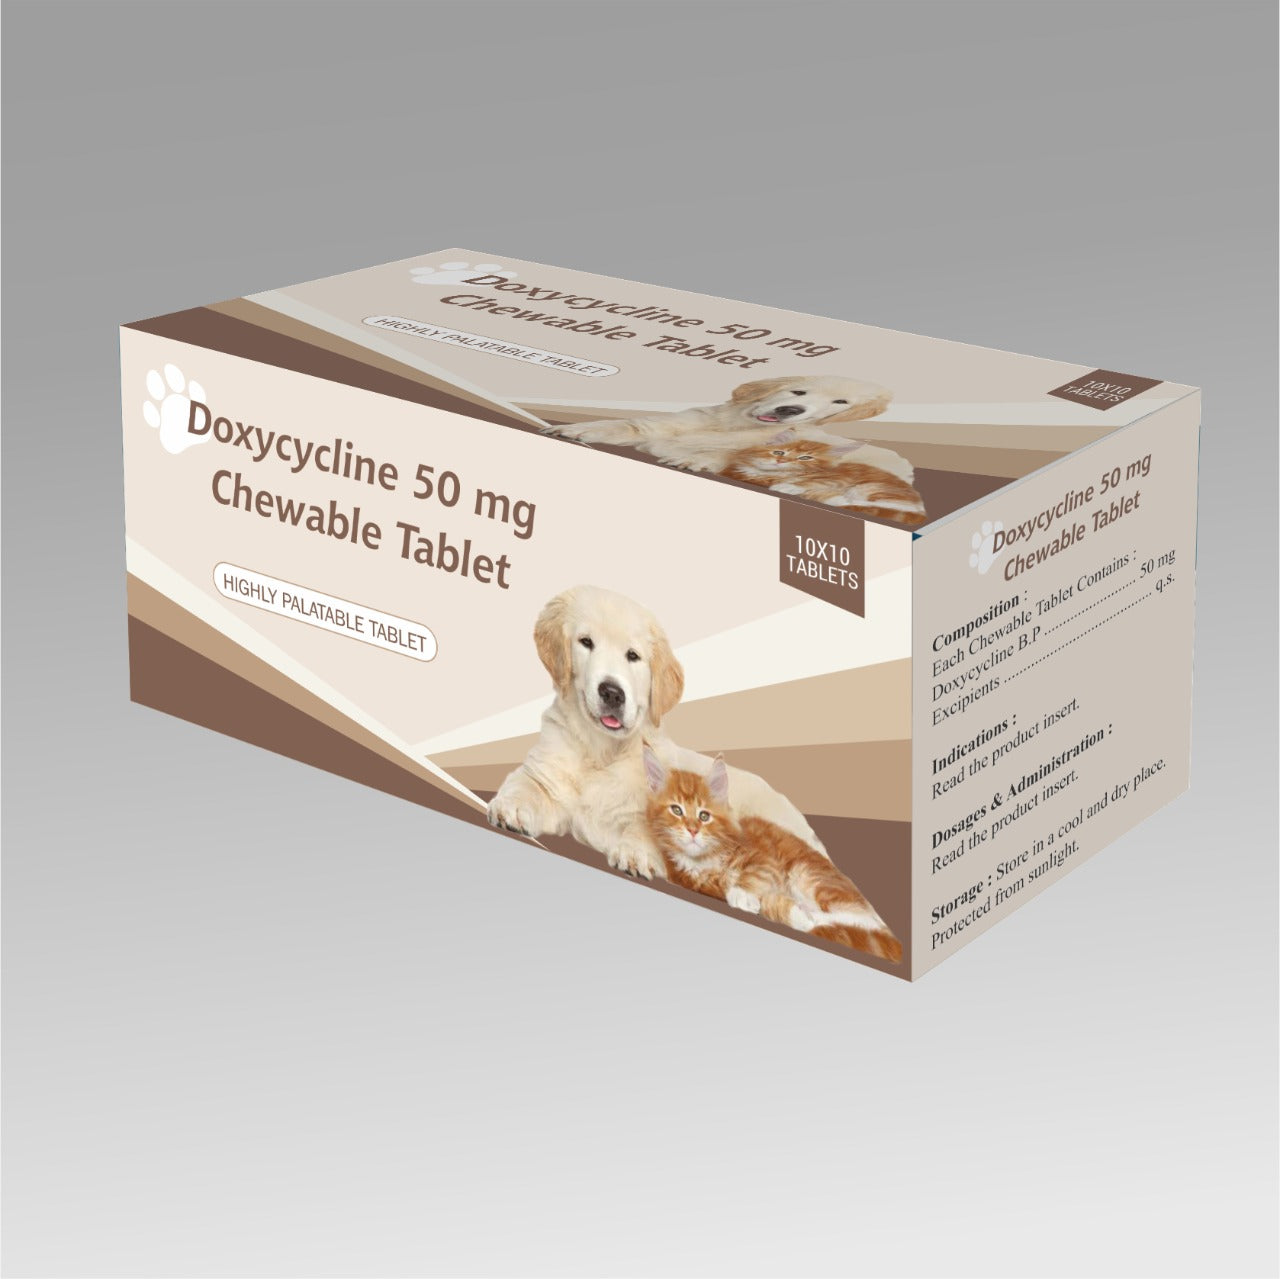 Doxycycline Monohydrate Chewable Tablets